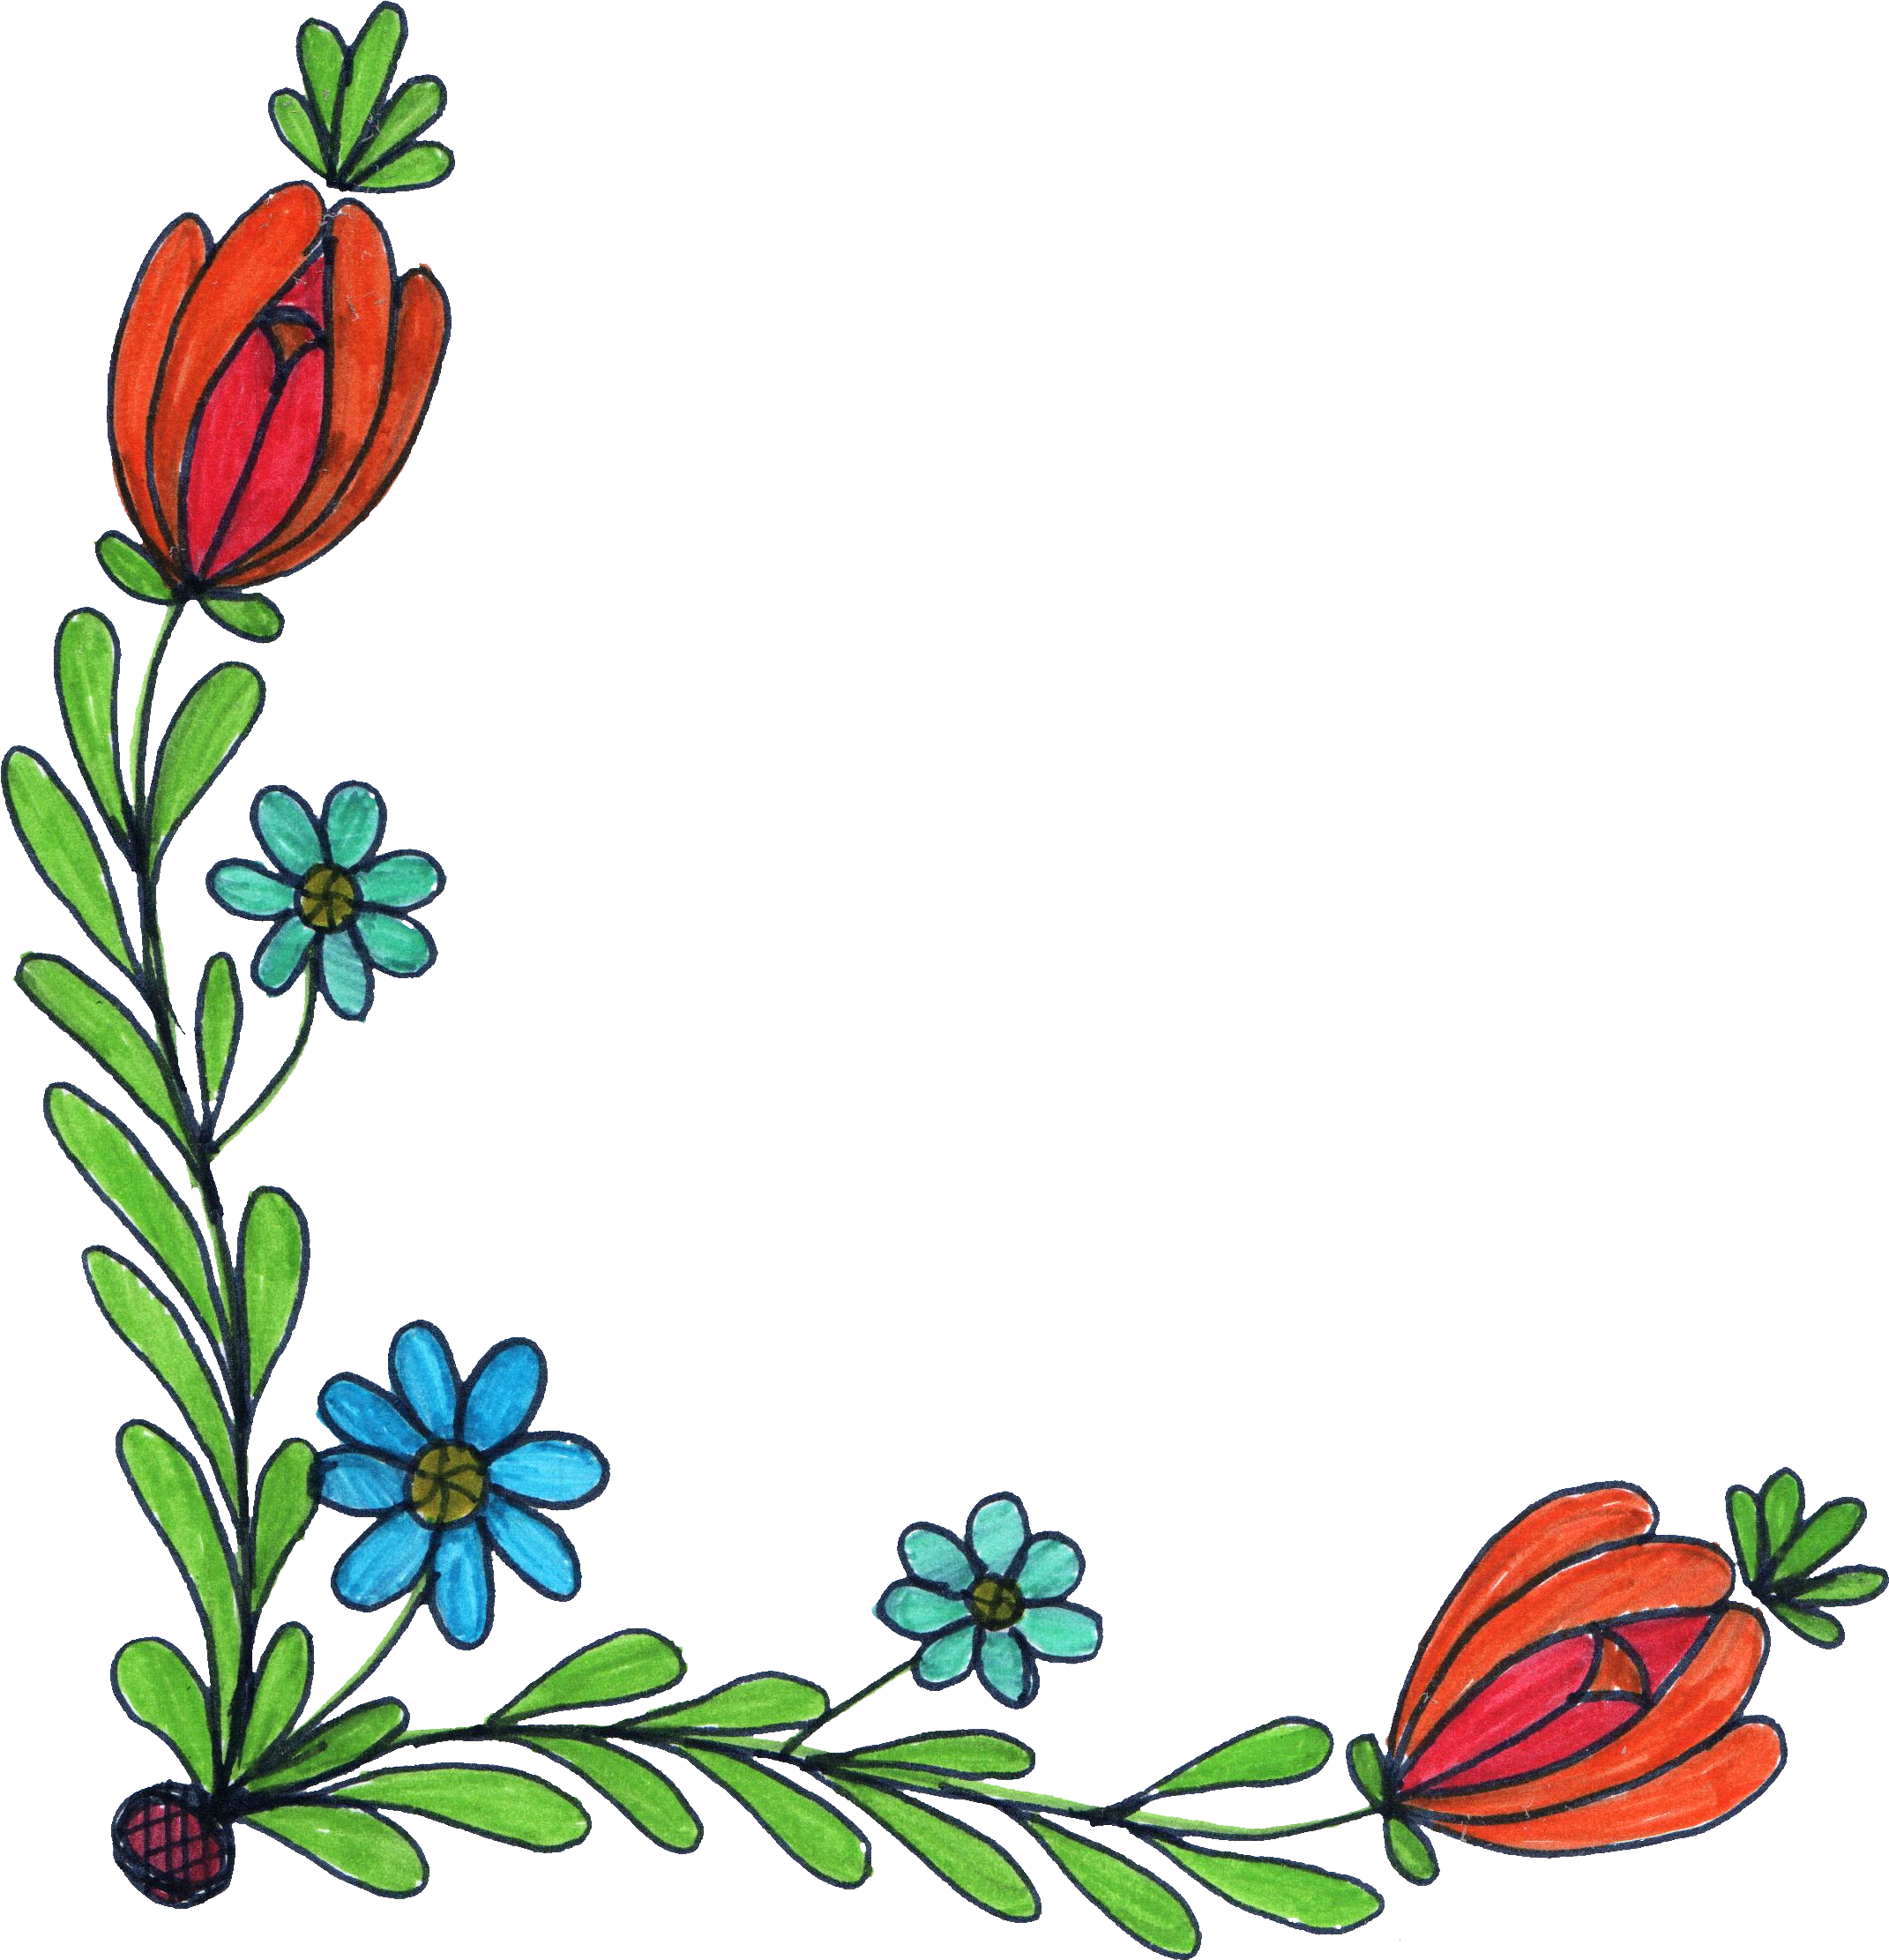 2142 × 2222 Px - Flower Drawing Transparent (2142x2222)